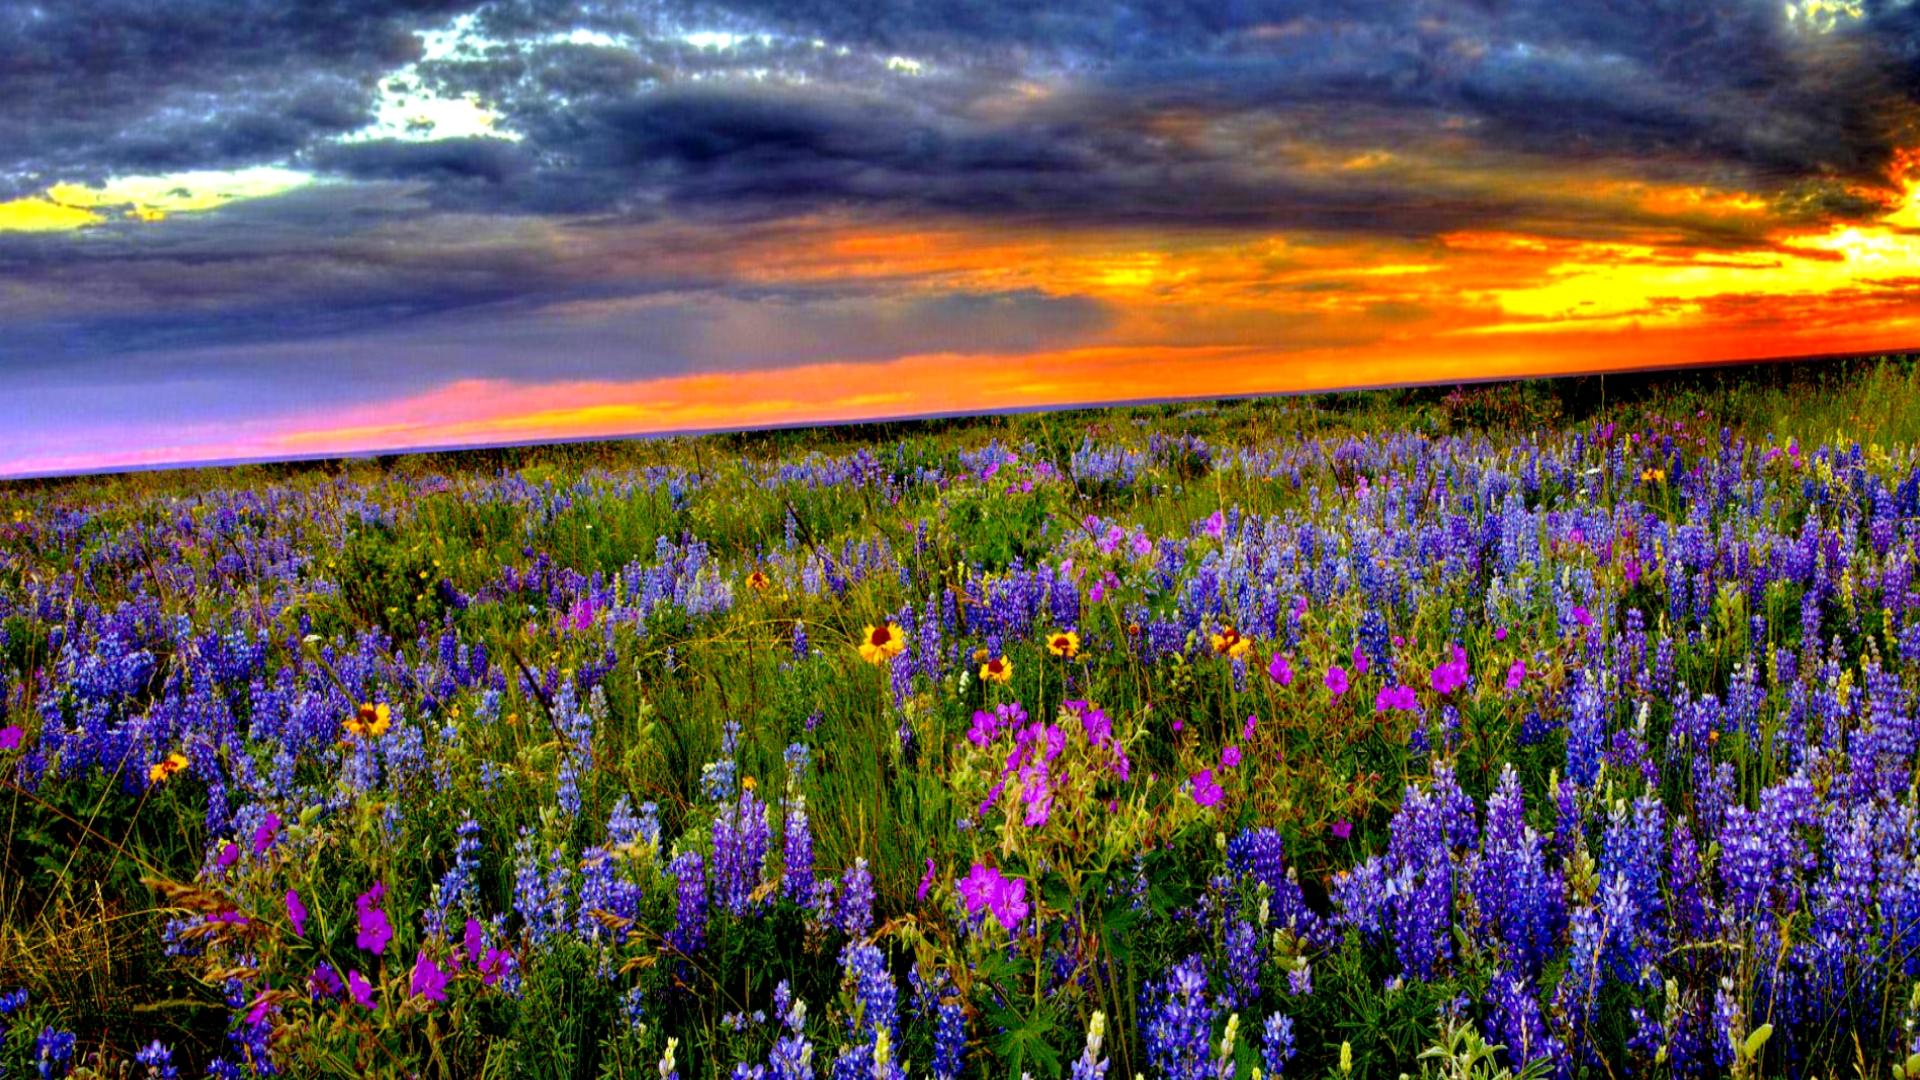 Flower Field At Sunset Hd Wallpaper Background Image 1920x1080 Id